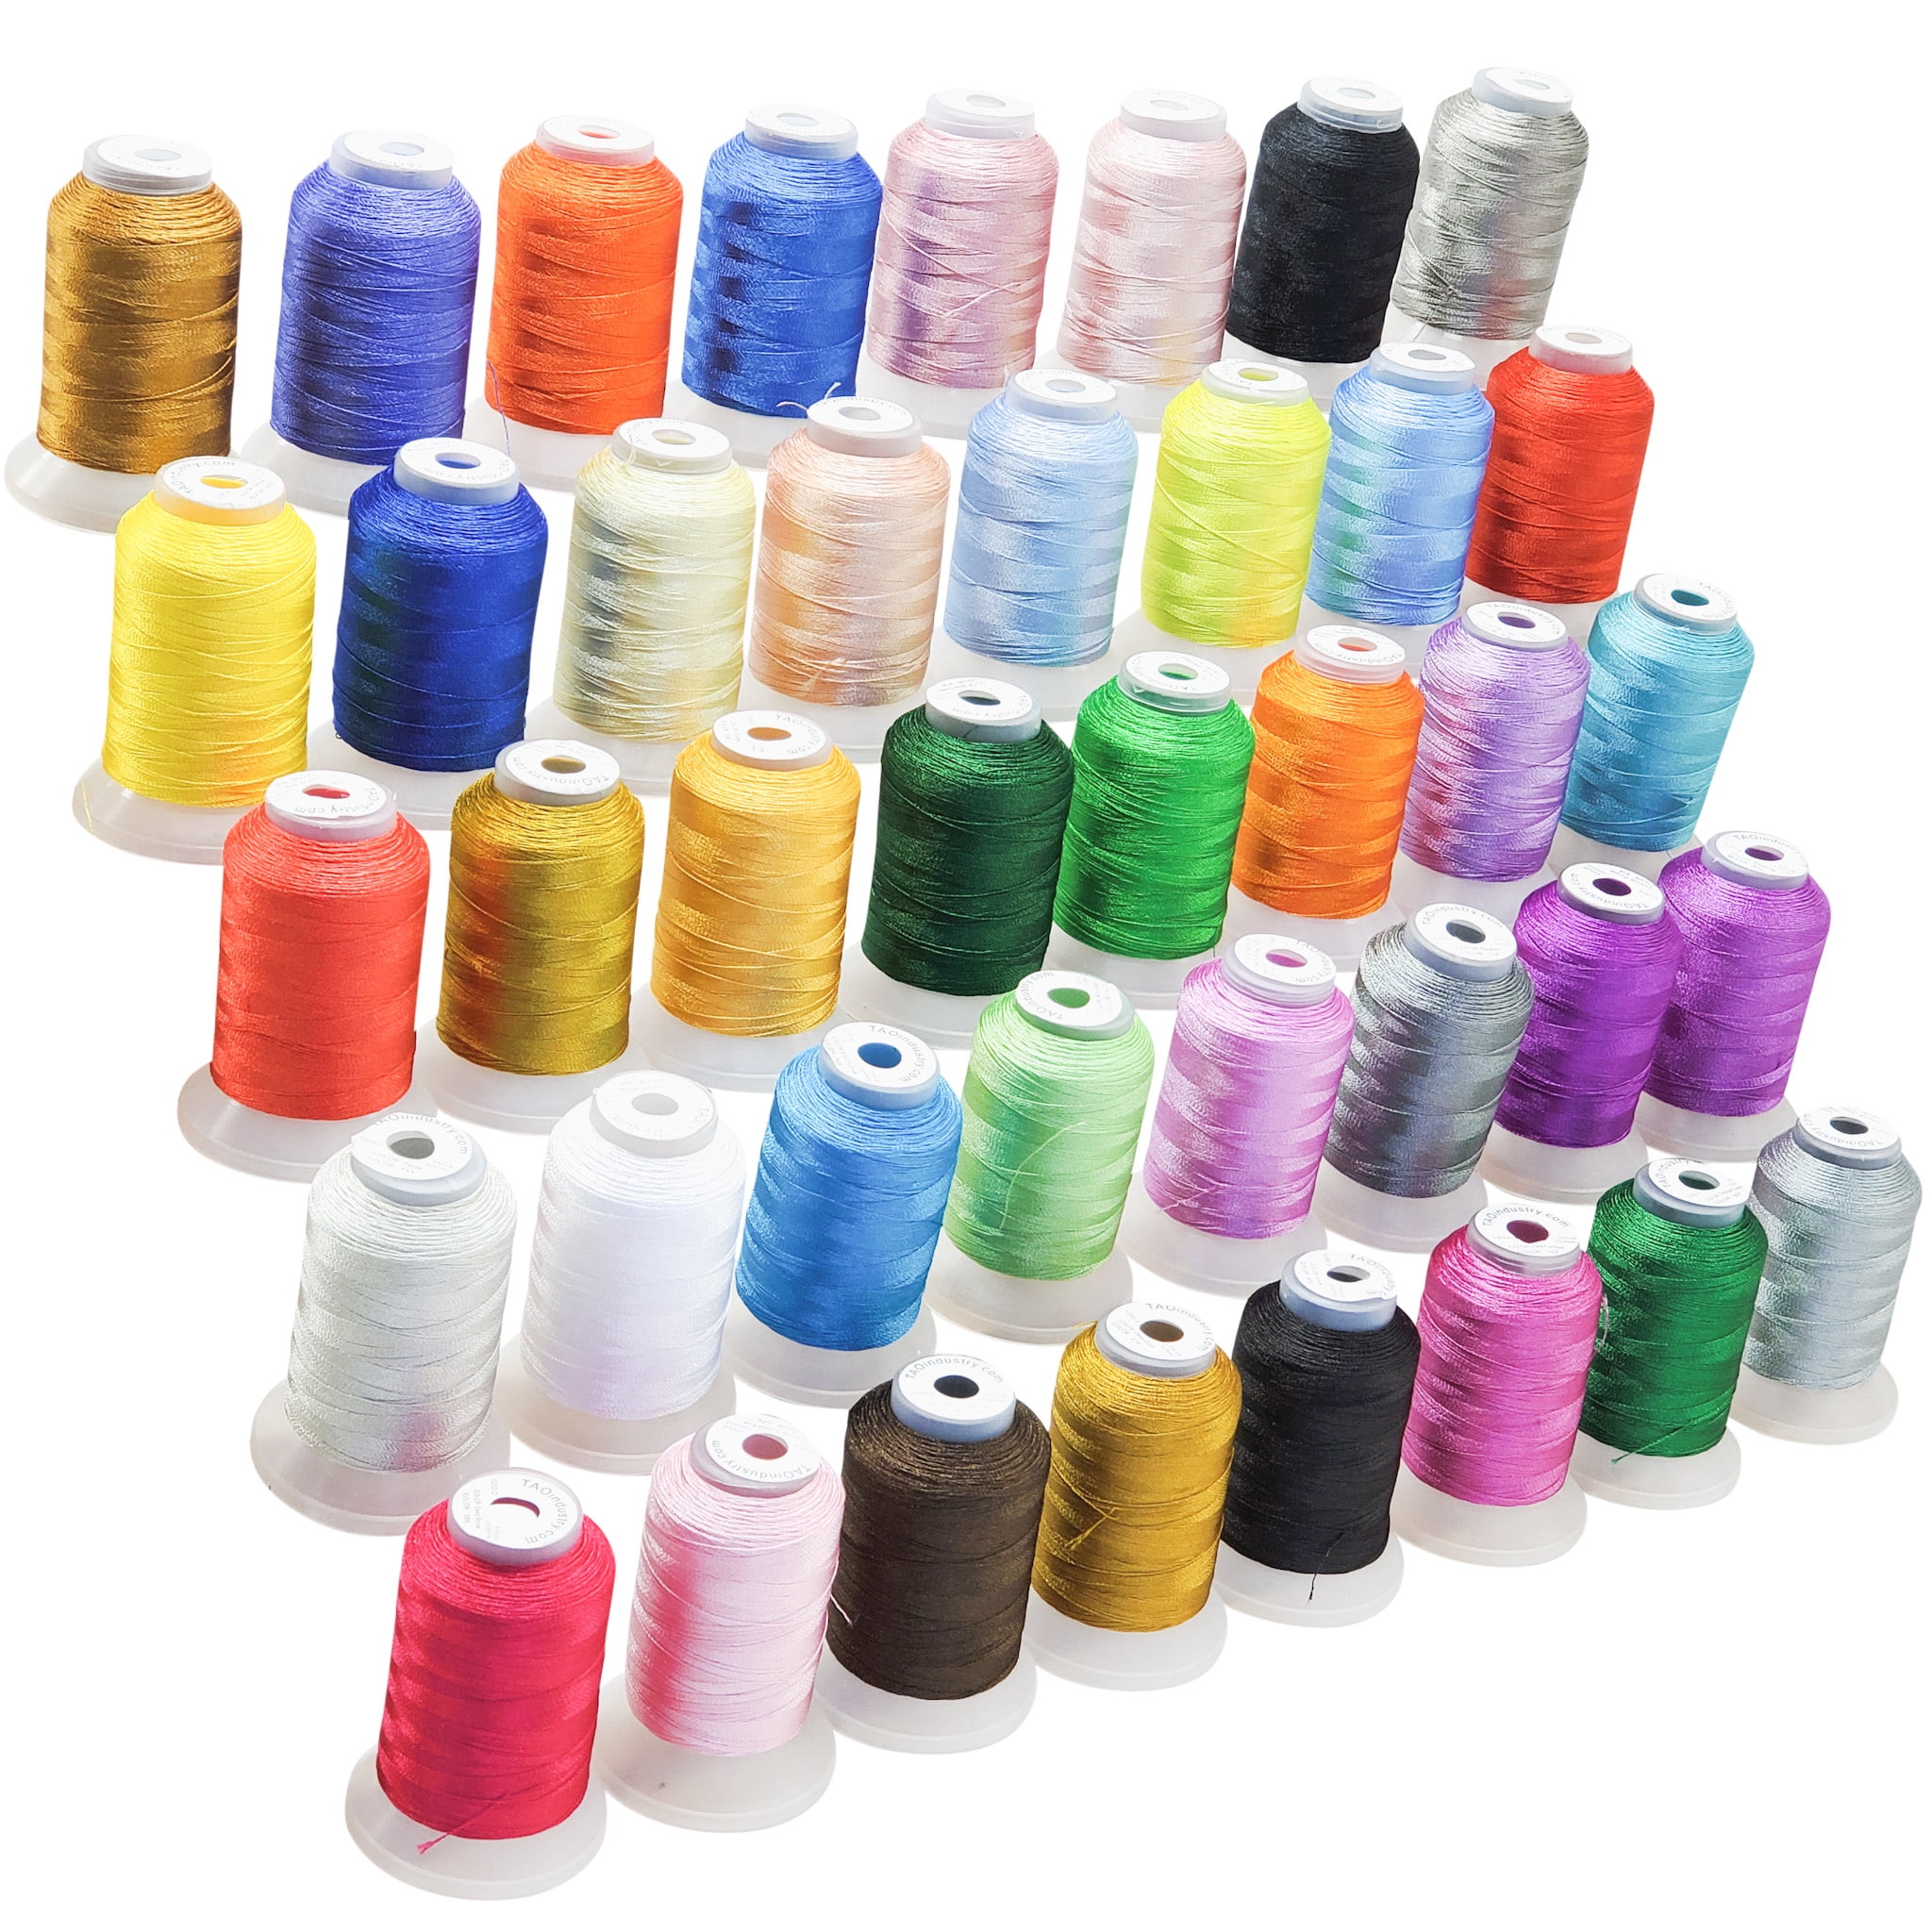 40 Colors Polyester Embroidery Machine Thread Kit for Embroidery/Sewing  Machine 40wt 500M(550Yards) 